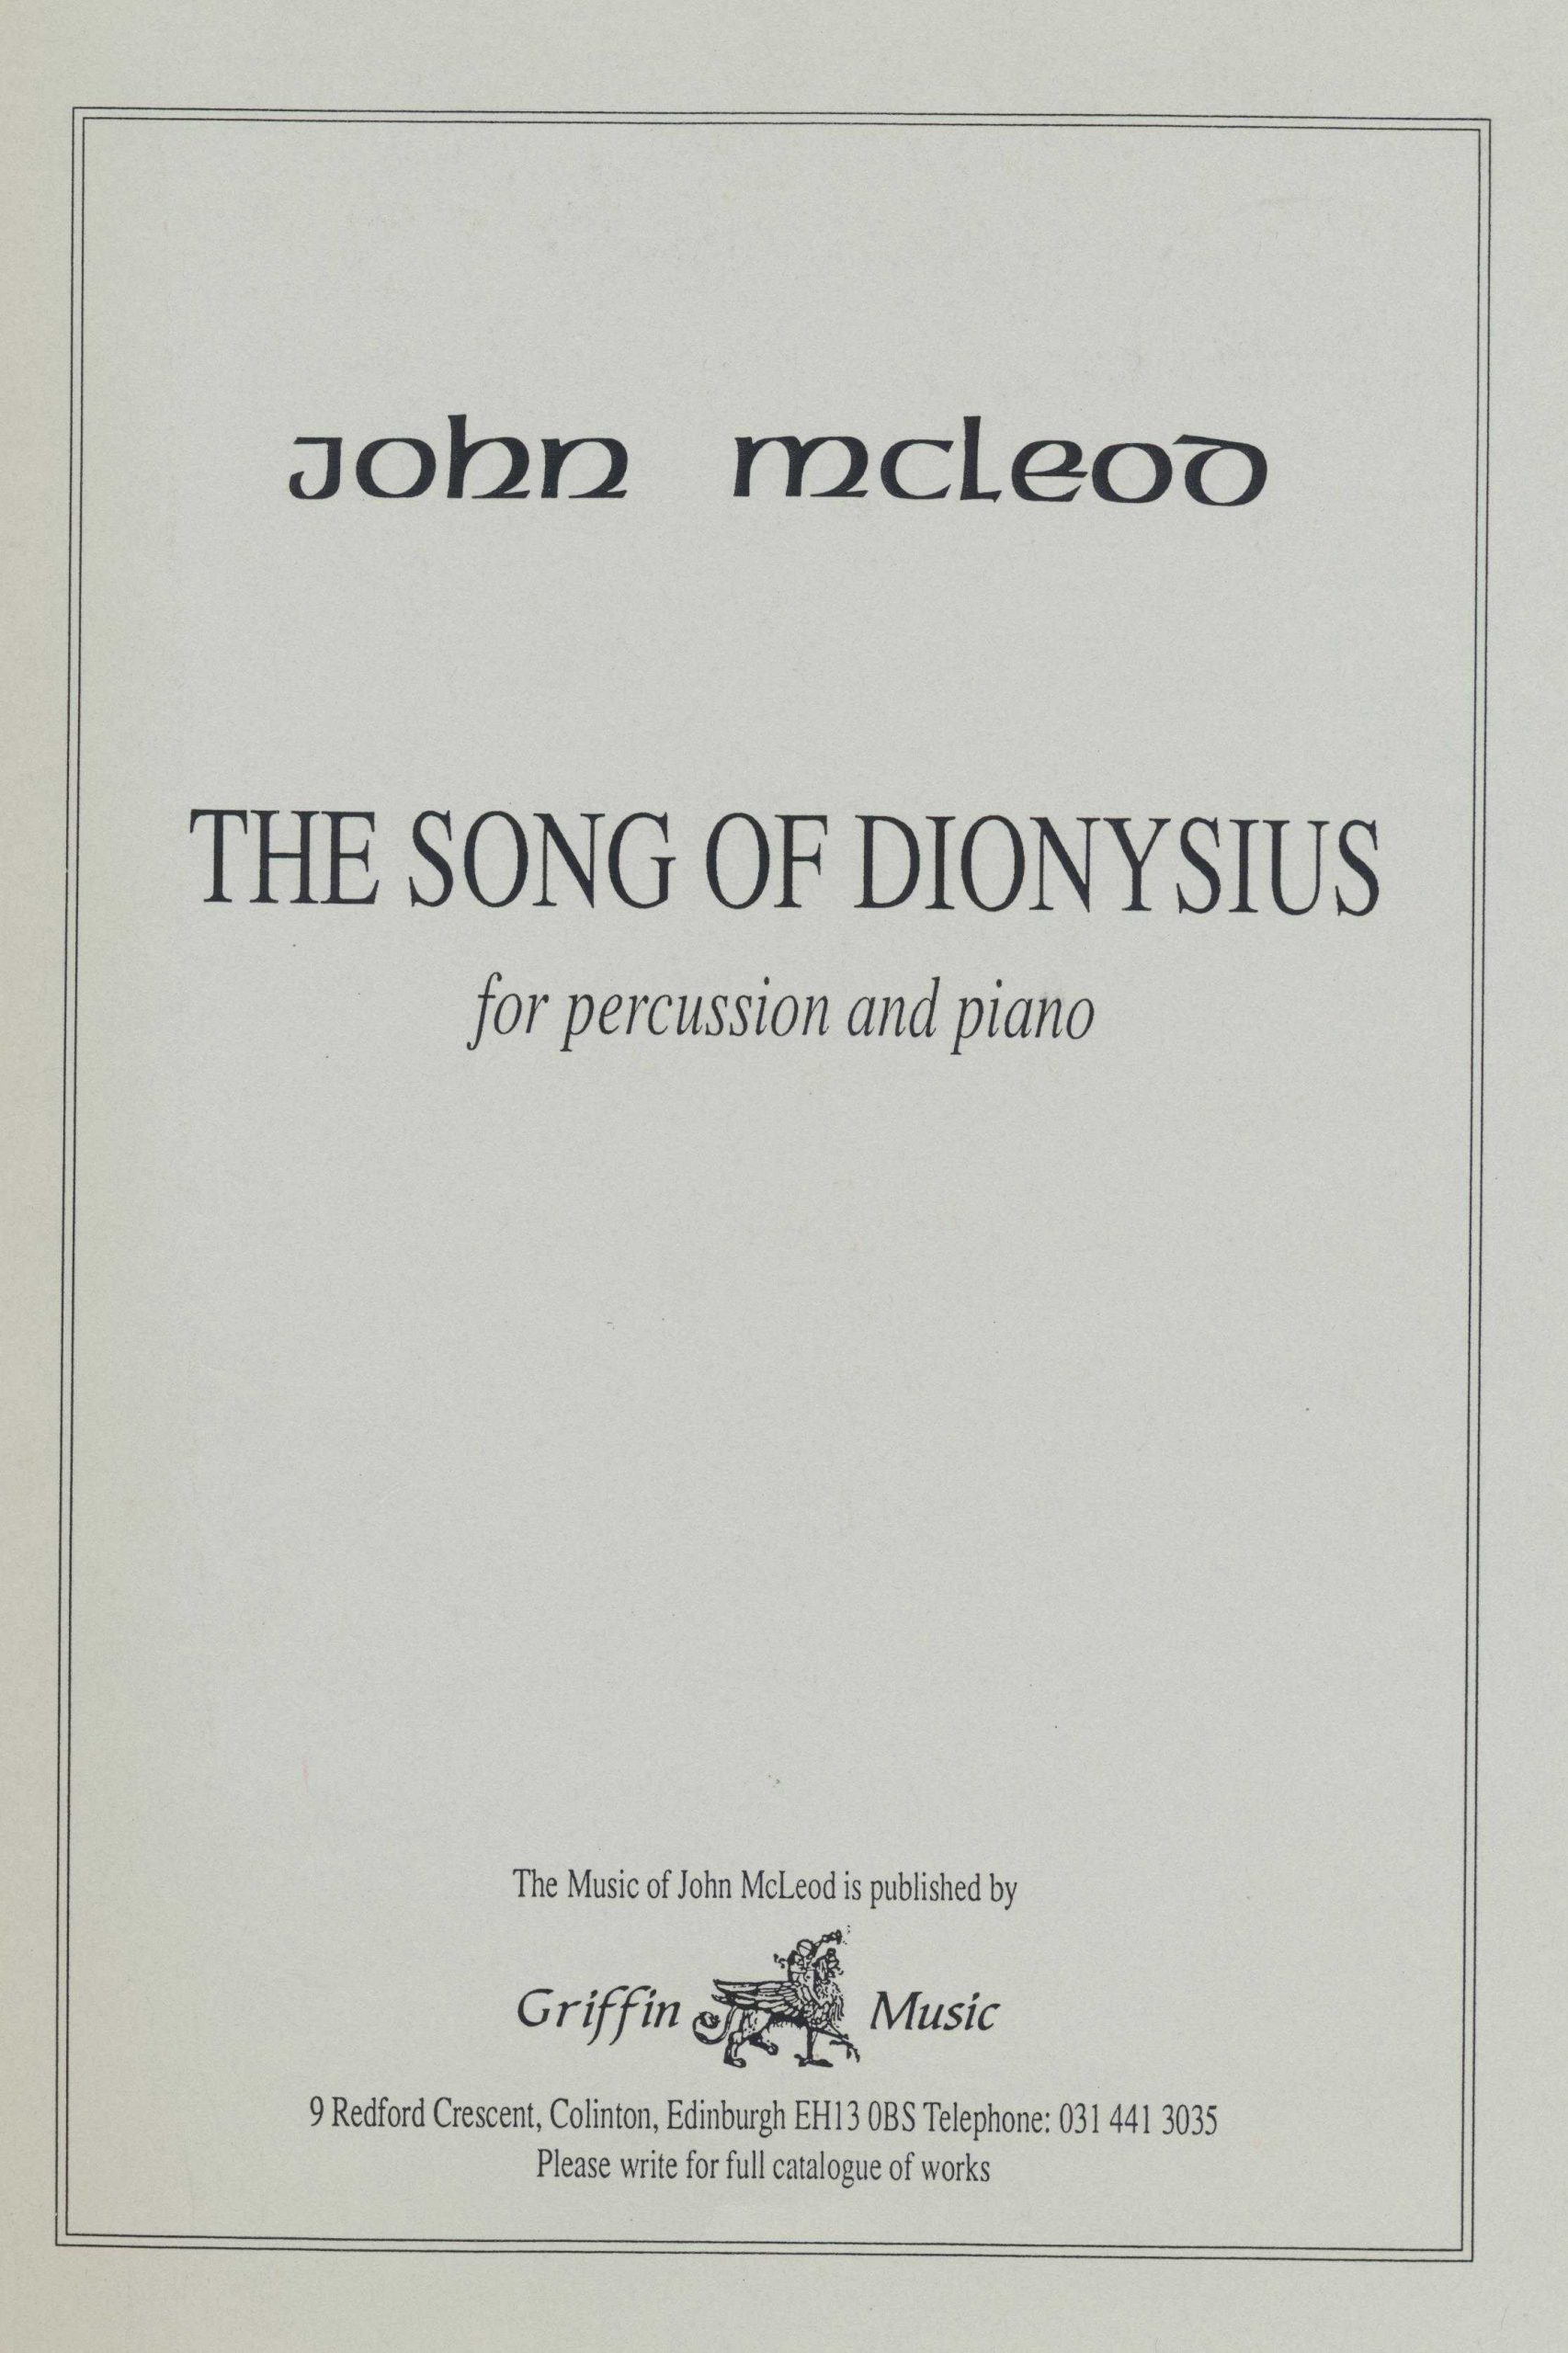 The Song of Dionysius by John McLeod